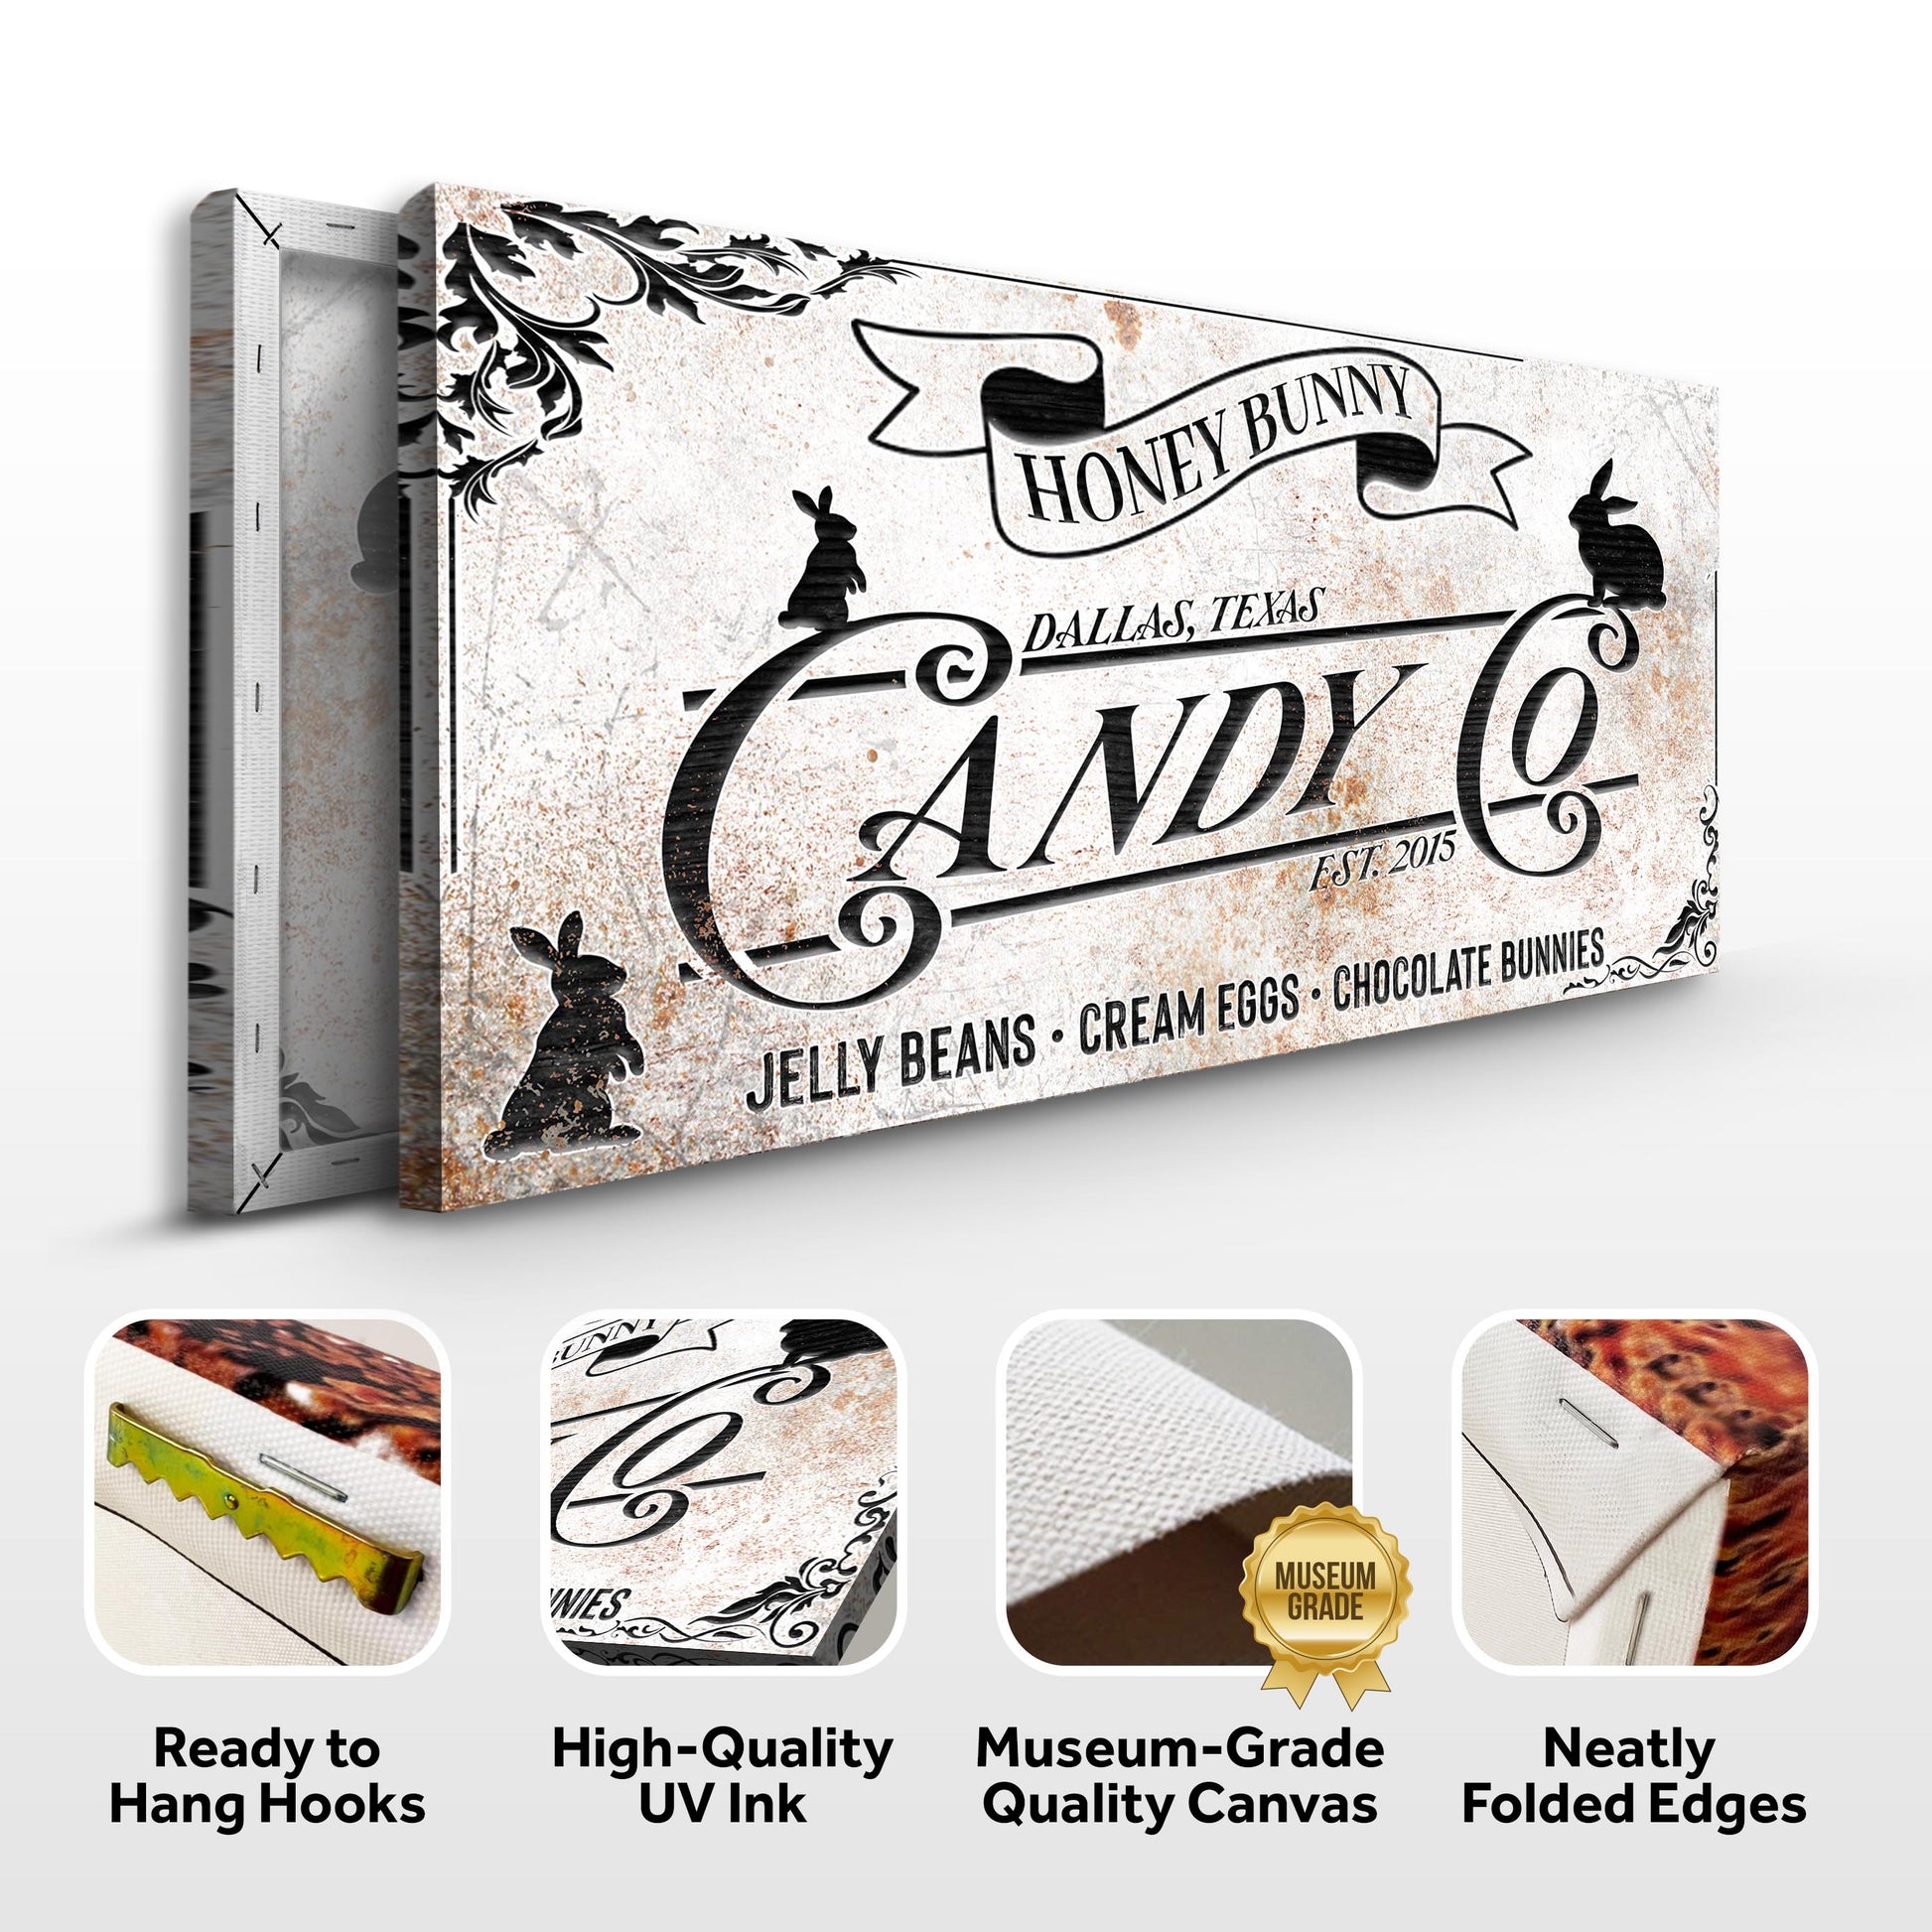 Honey Bunny Candy Company Sign Specs - Image by Tailored Canvases